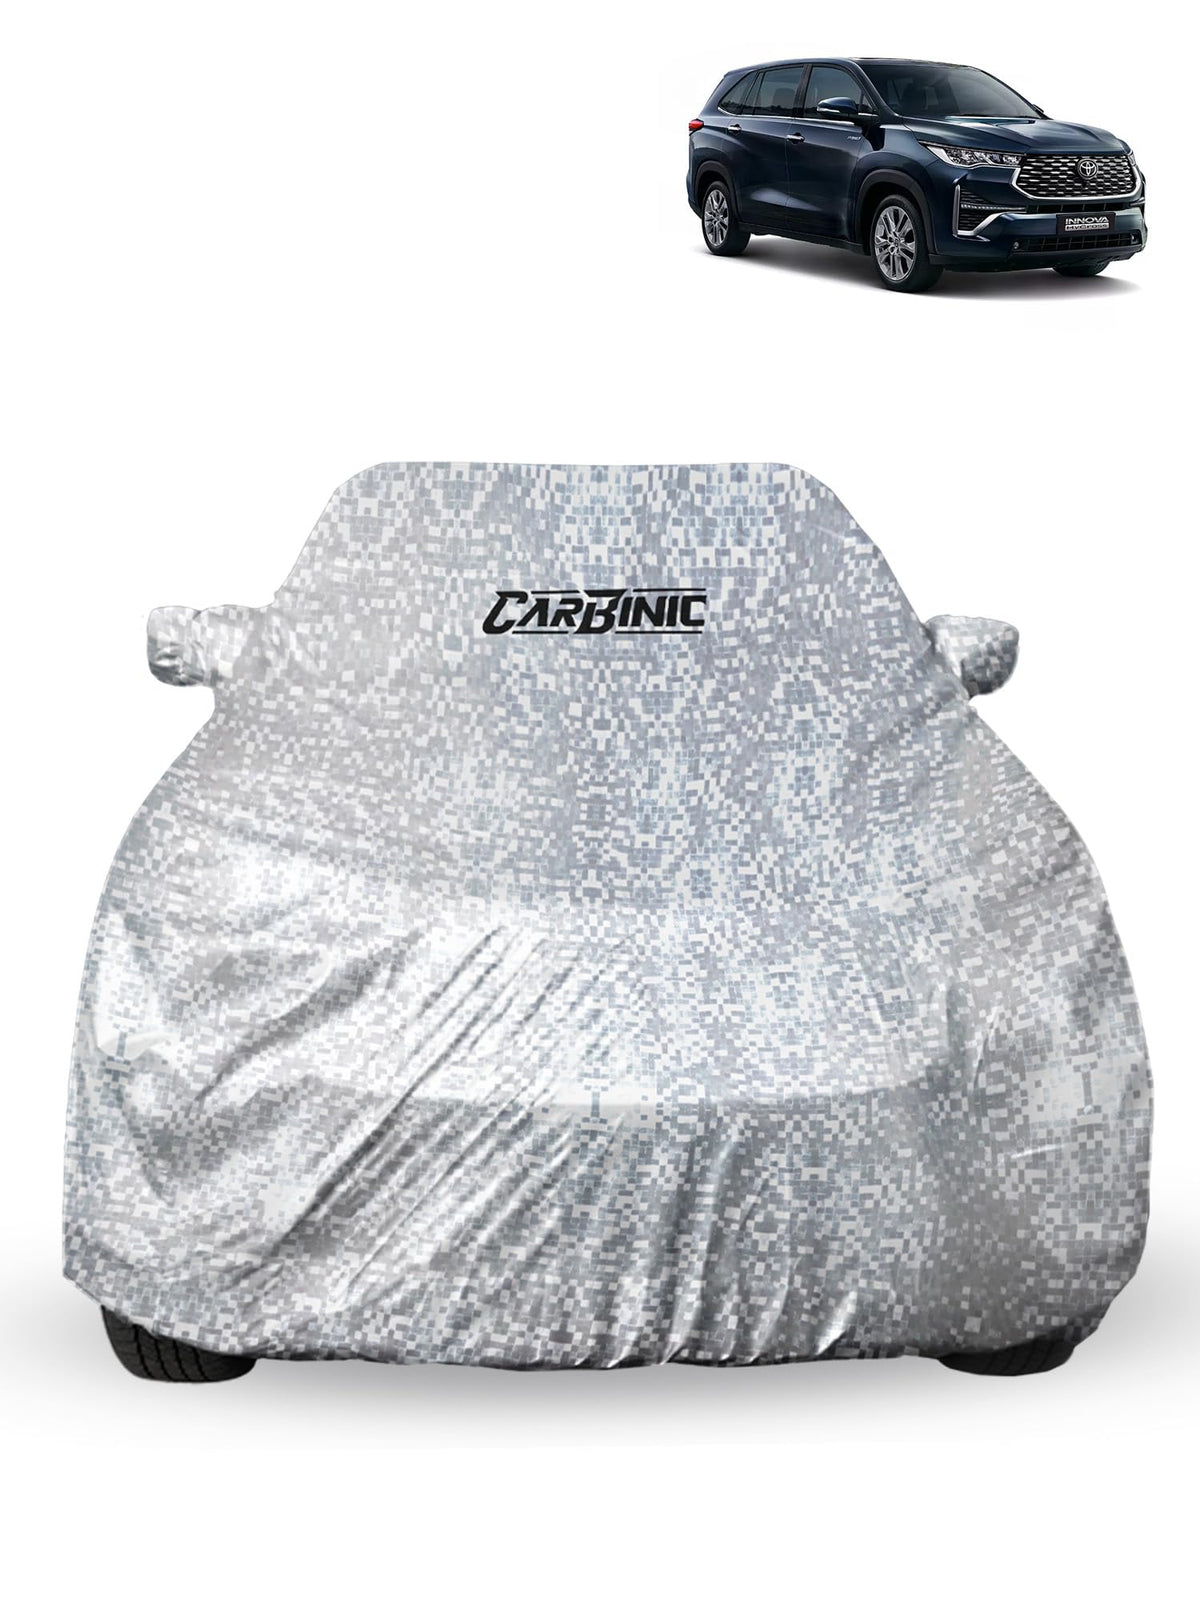 CARBINIC Car Cover for Toyota Innova Hycross (7 Seater) 2023 Waterproof (Tested) and Dustproof Custom Fit UV Heat Resistant Outdoor Protection with Triple Stitched Fully Elastic Surface